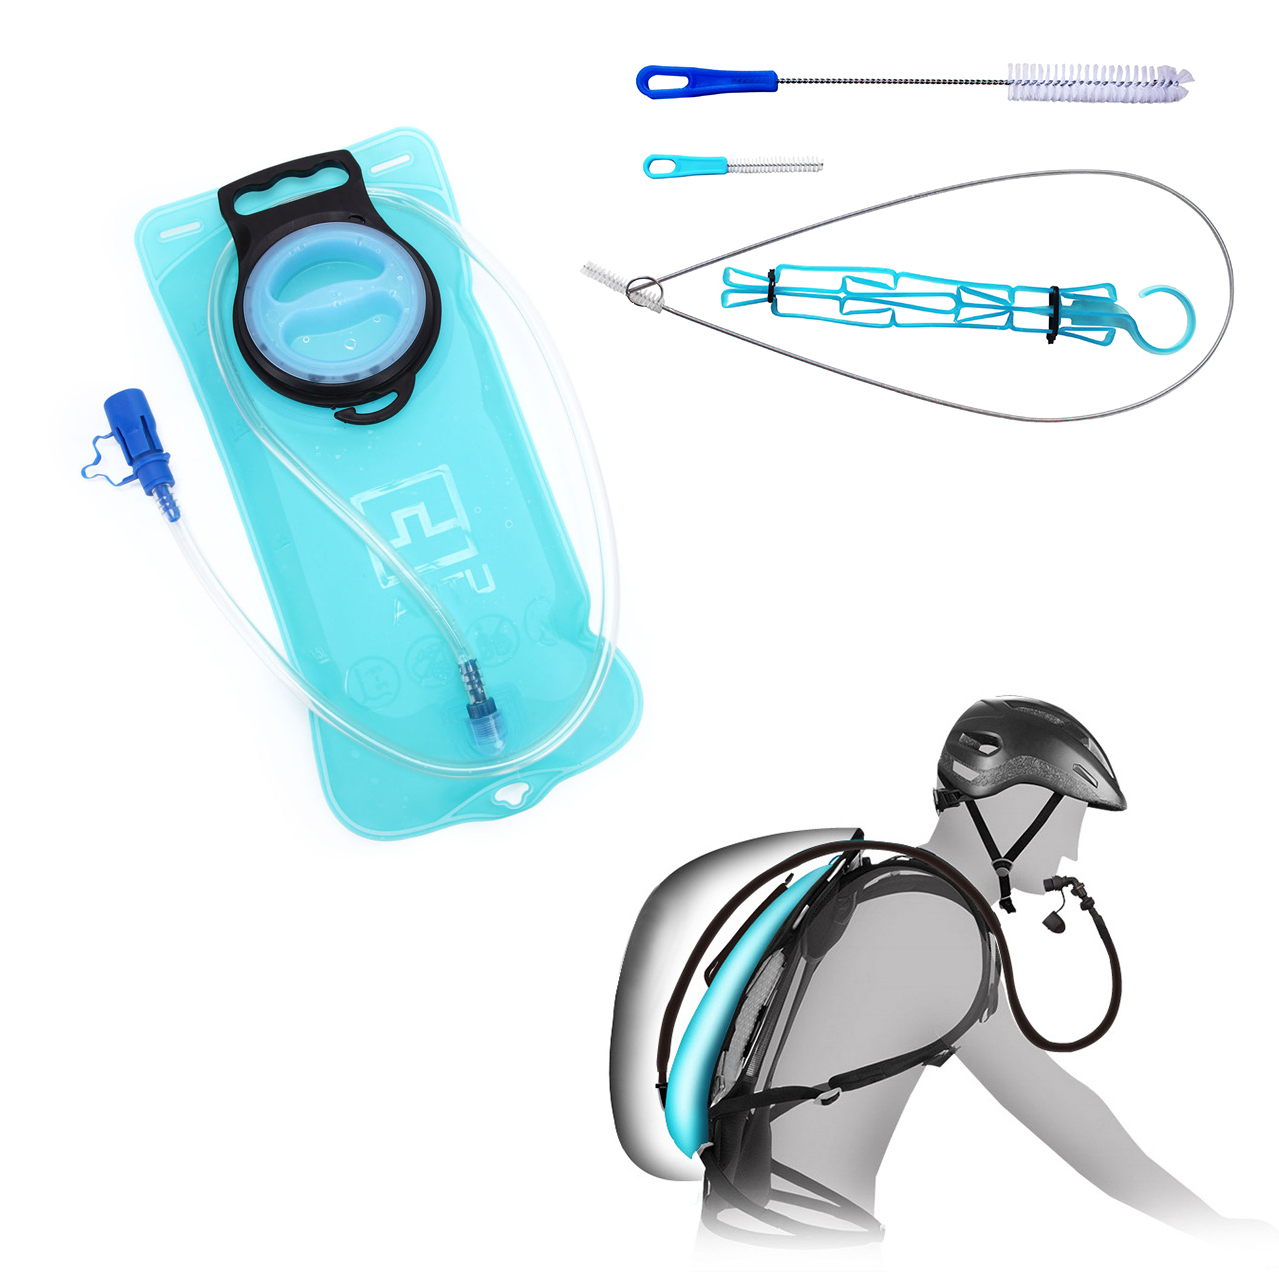 

AOTU 2L Bicycle Blue Water Bag Hydration Pack Small Nozzle Drinking Hiking Camping Running with 1 pc Cleaning Set